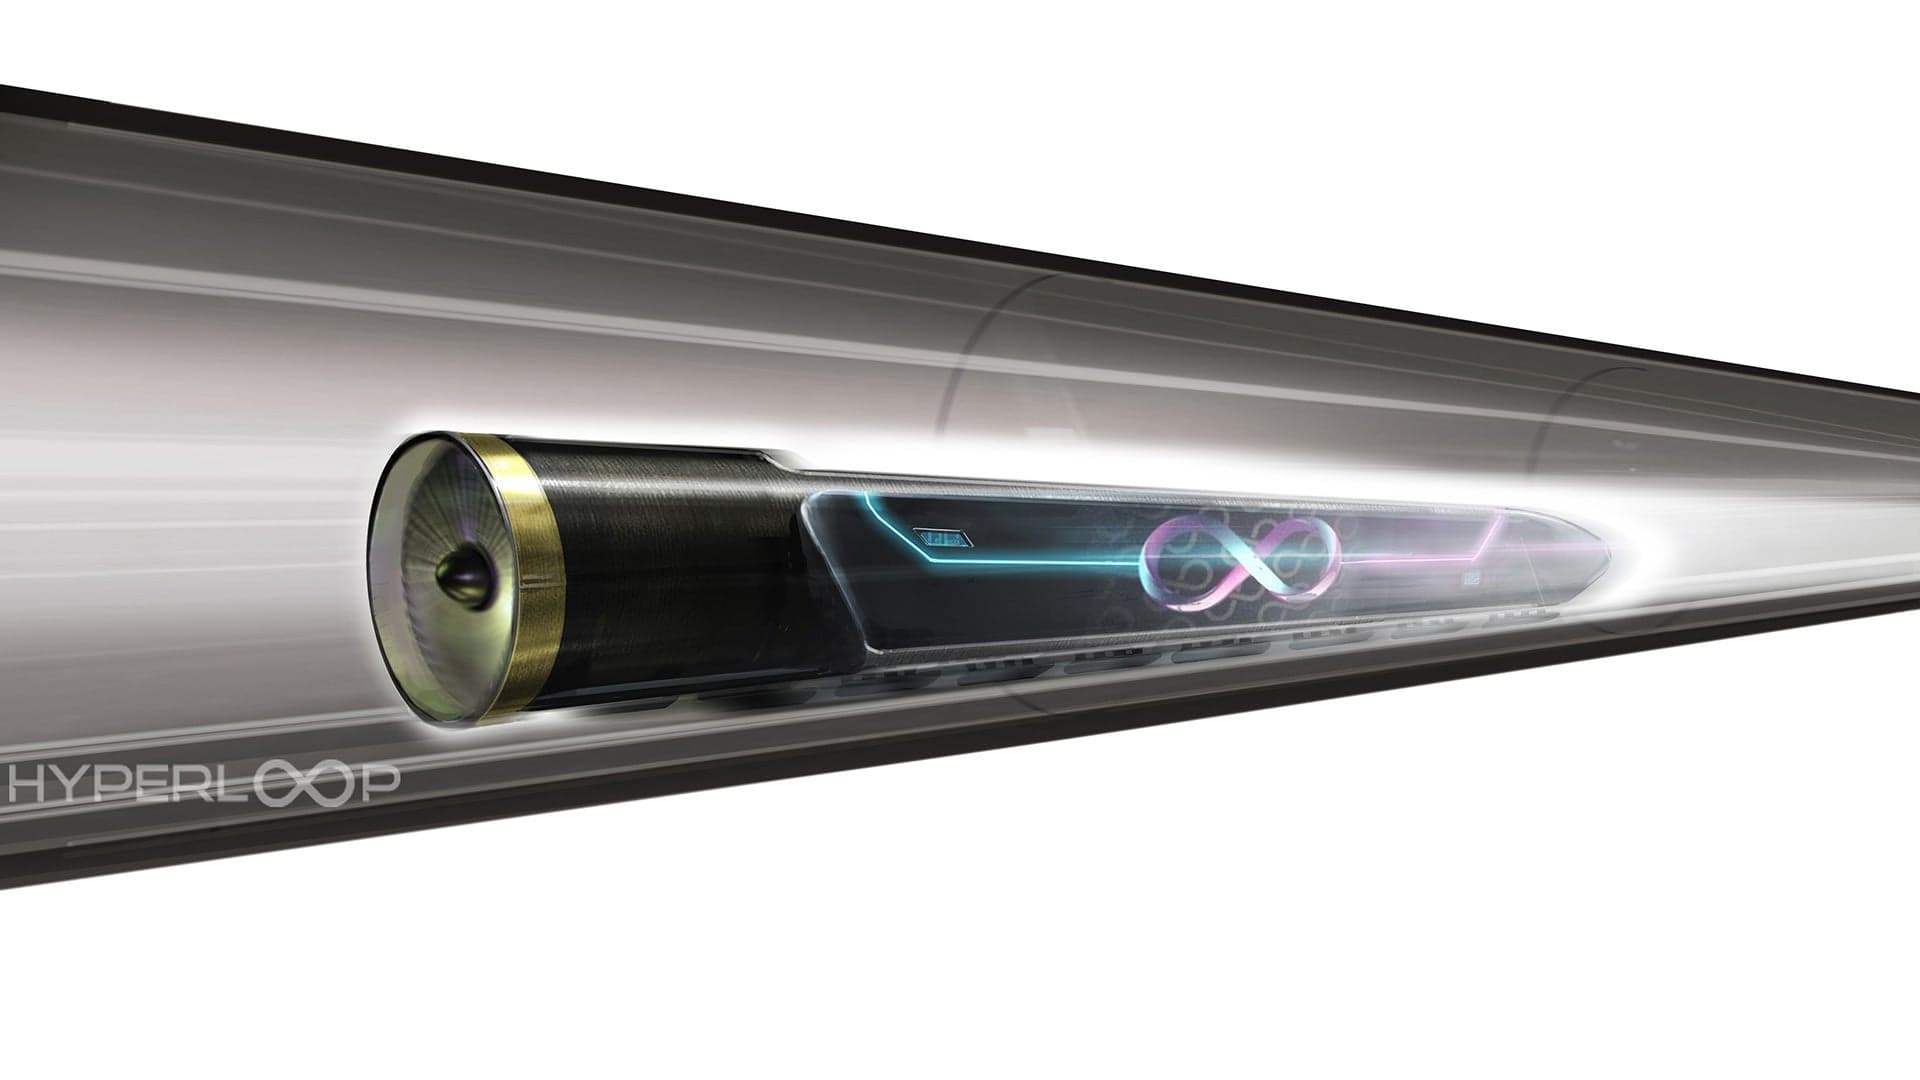 The Hyperloop Could Look Like One of These Wild Designs